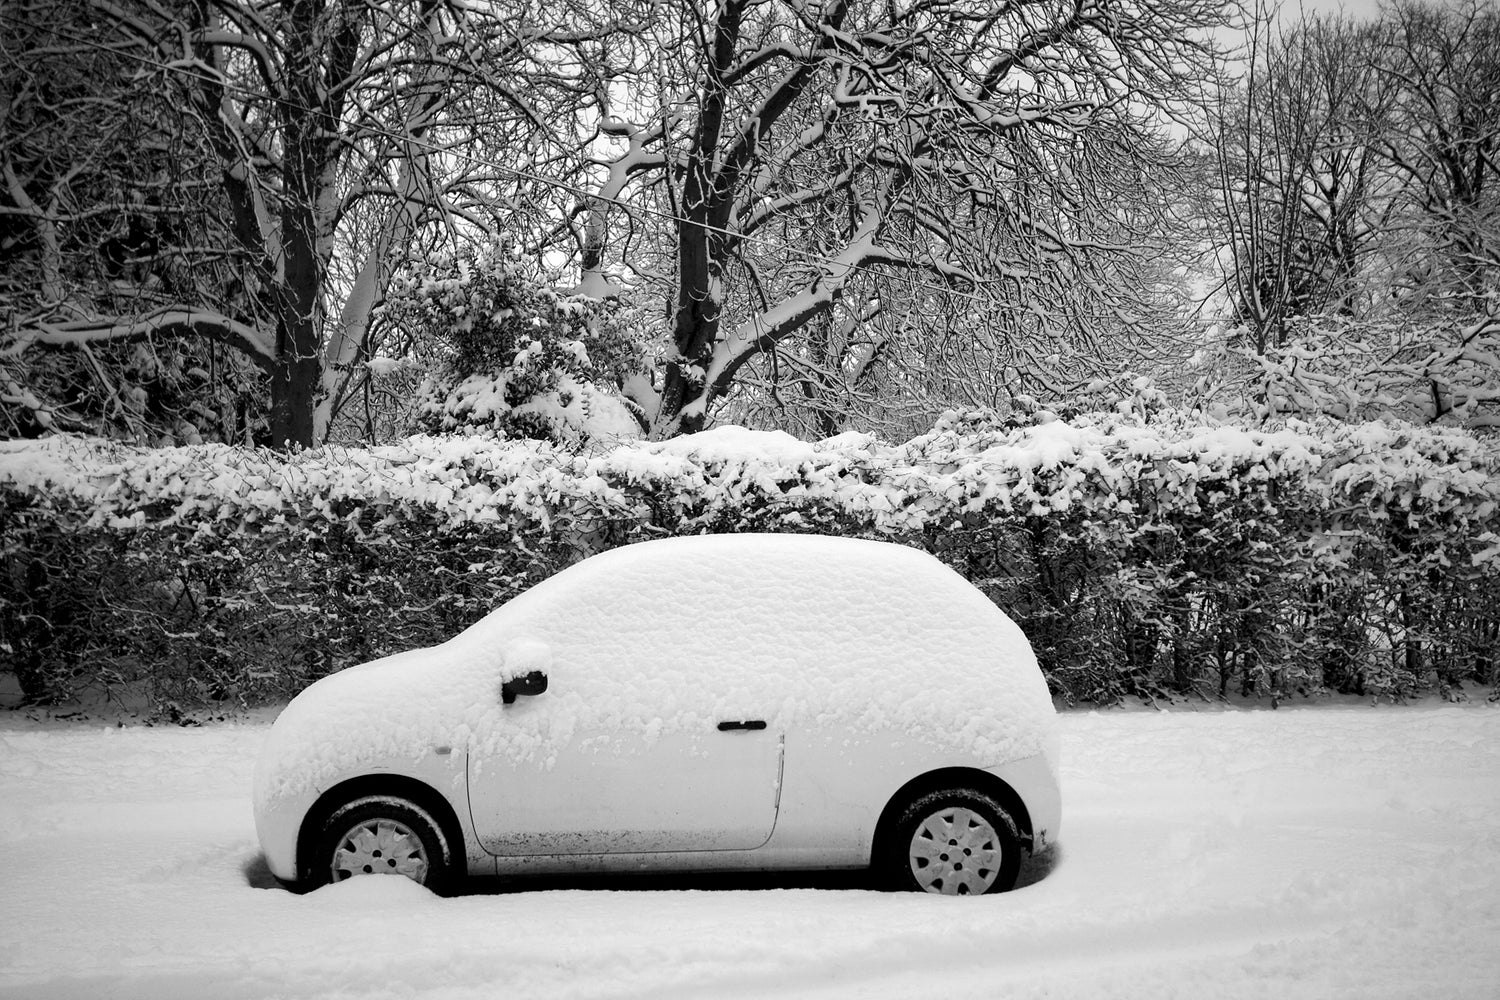 Winterizing Your Car: Essential Tips for All Drivers